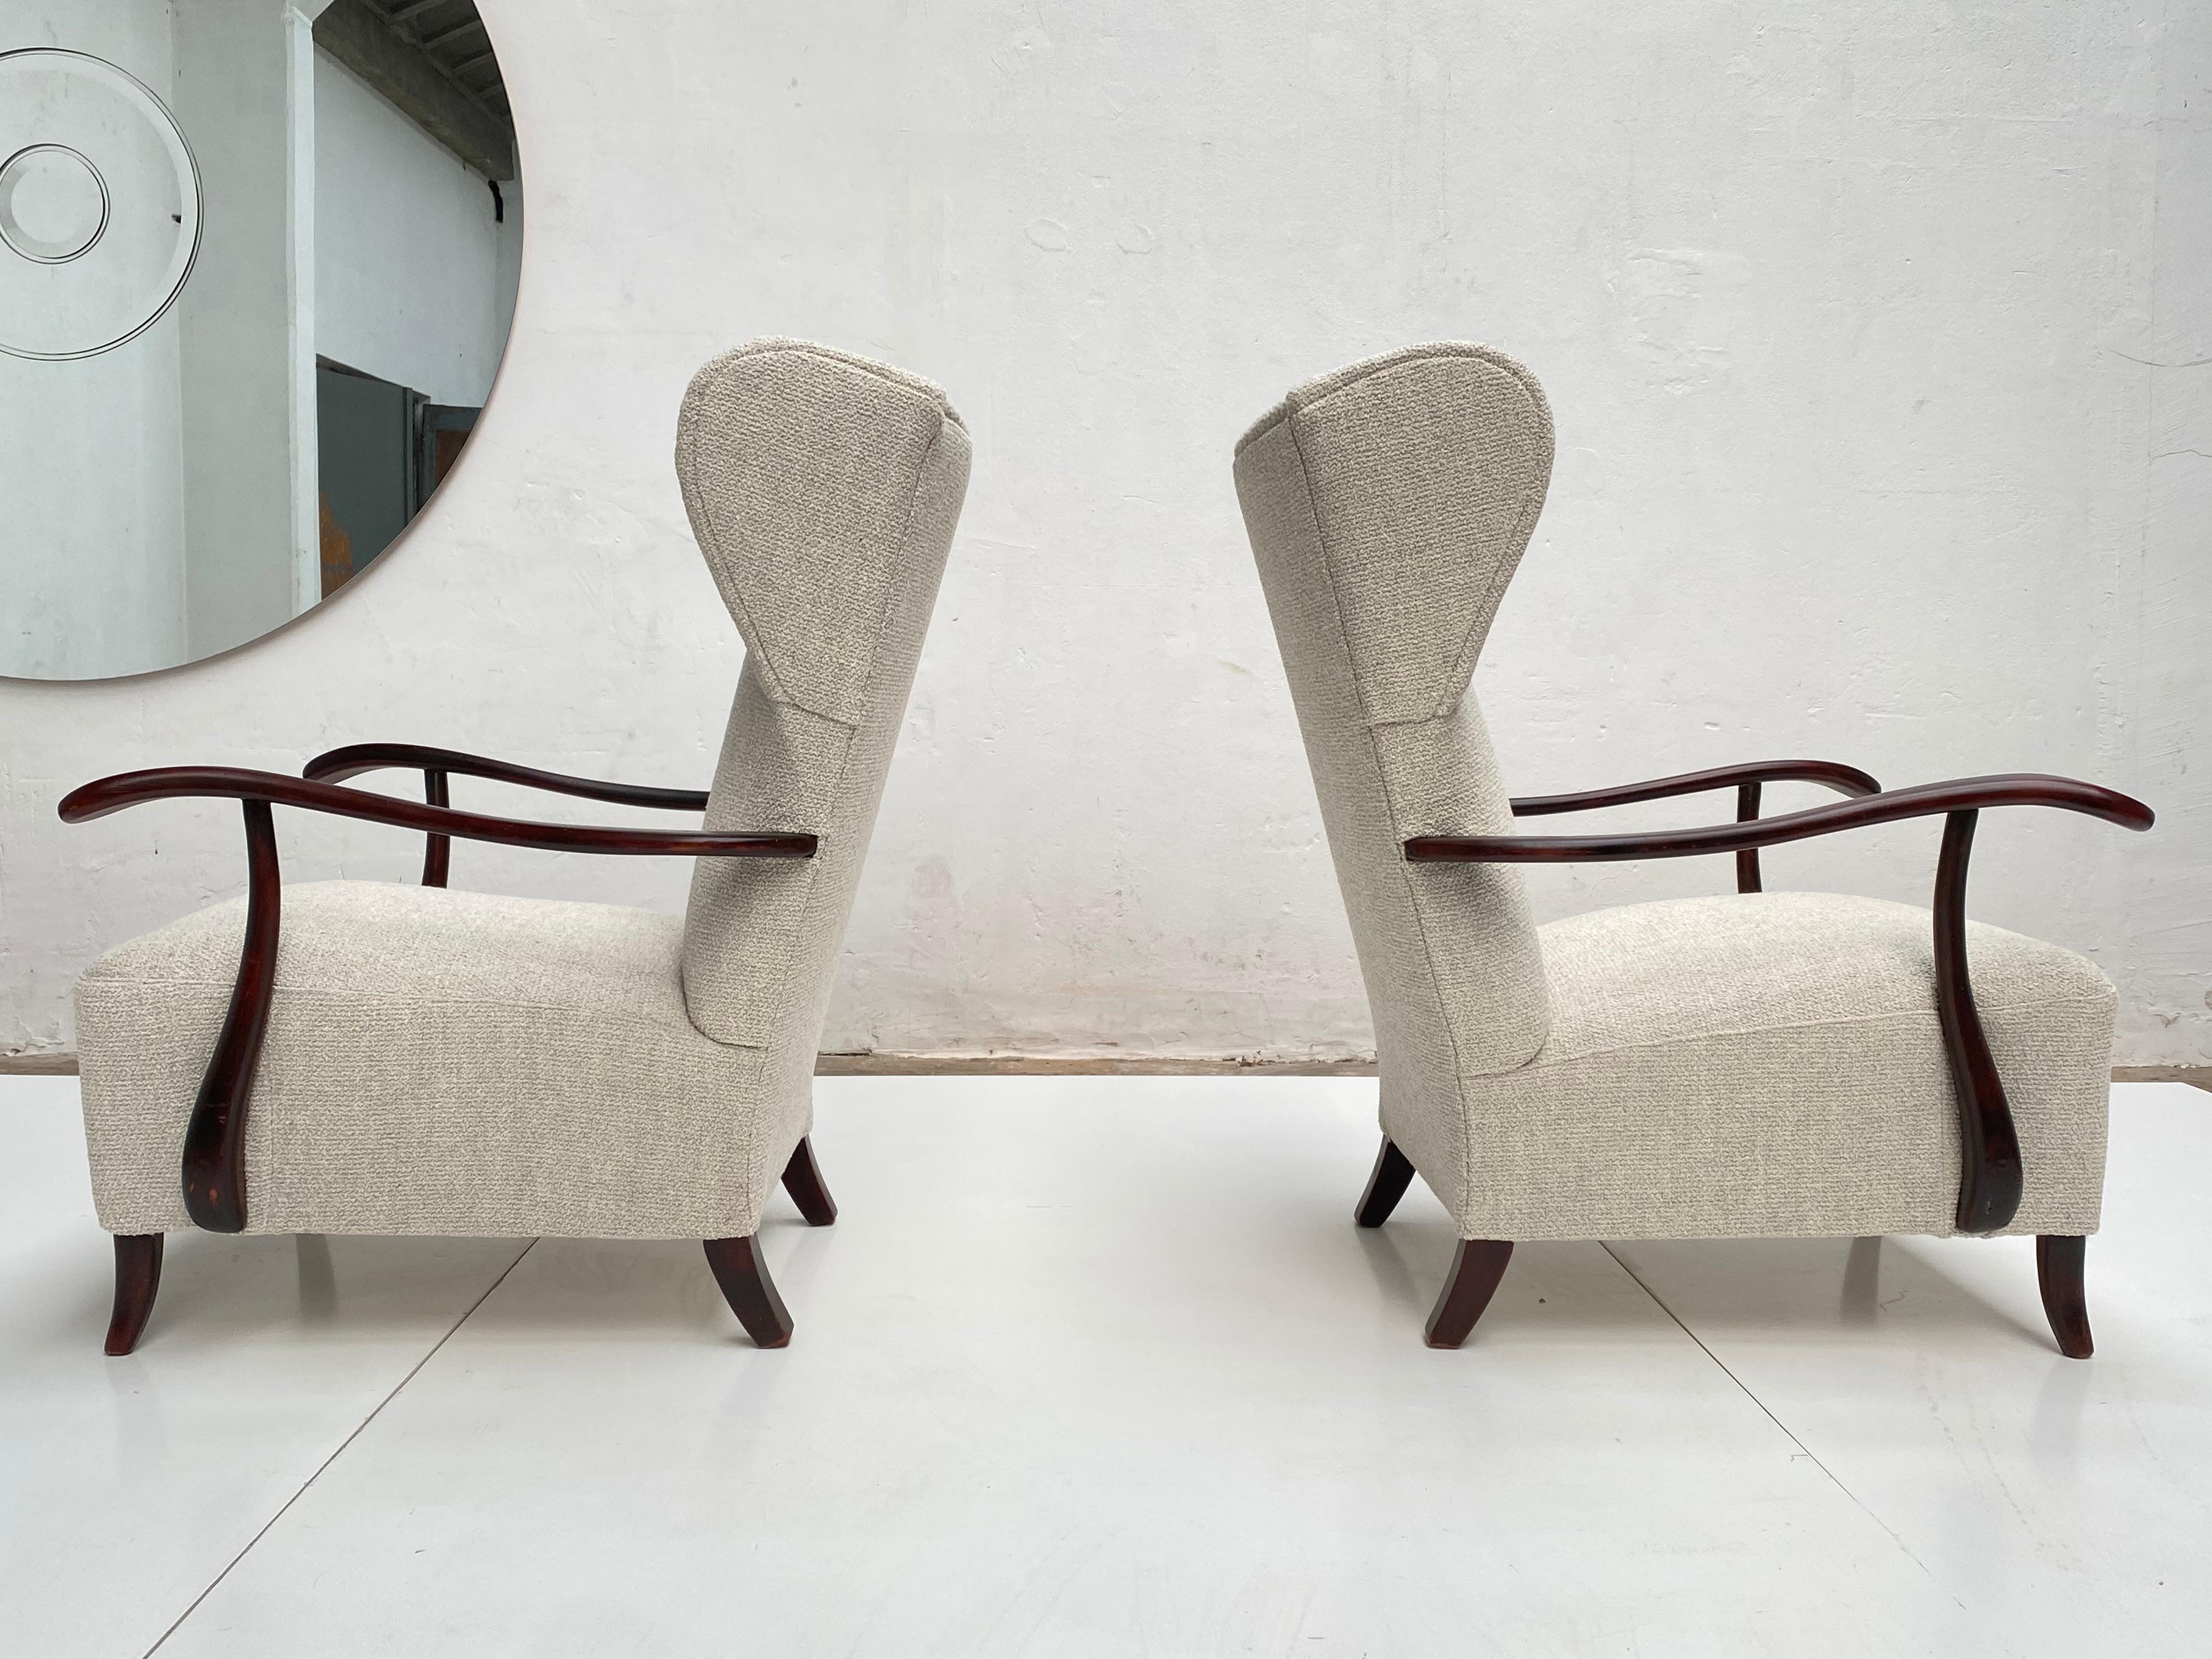 Lovely pair of 1940s sculptural form, wing back chairs attributed to the italian architect and designer Paolo Buffa who learned his trade in Gio Ponti's studio in the late 1920s. The chairs feature a beautiful flowing hardwood armrest design which